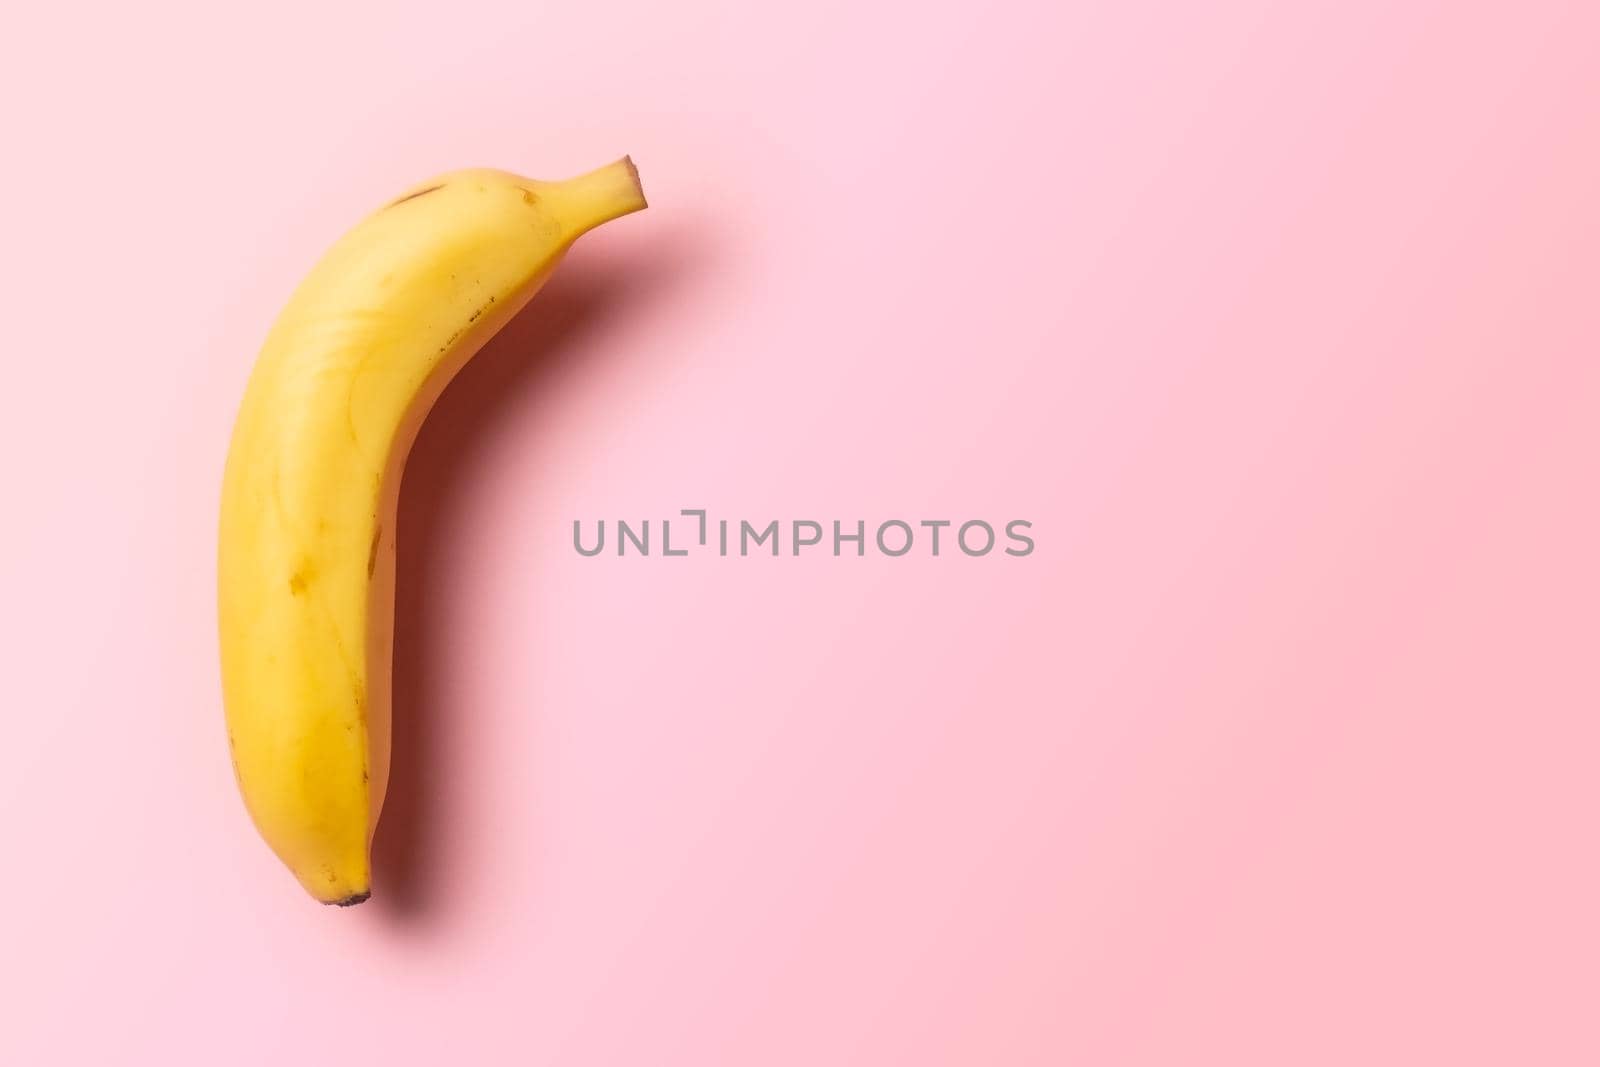 a ripe banana in the upper left corner on a pink background with soft side lighting